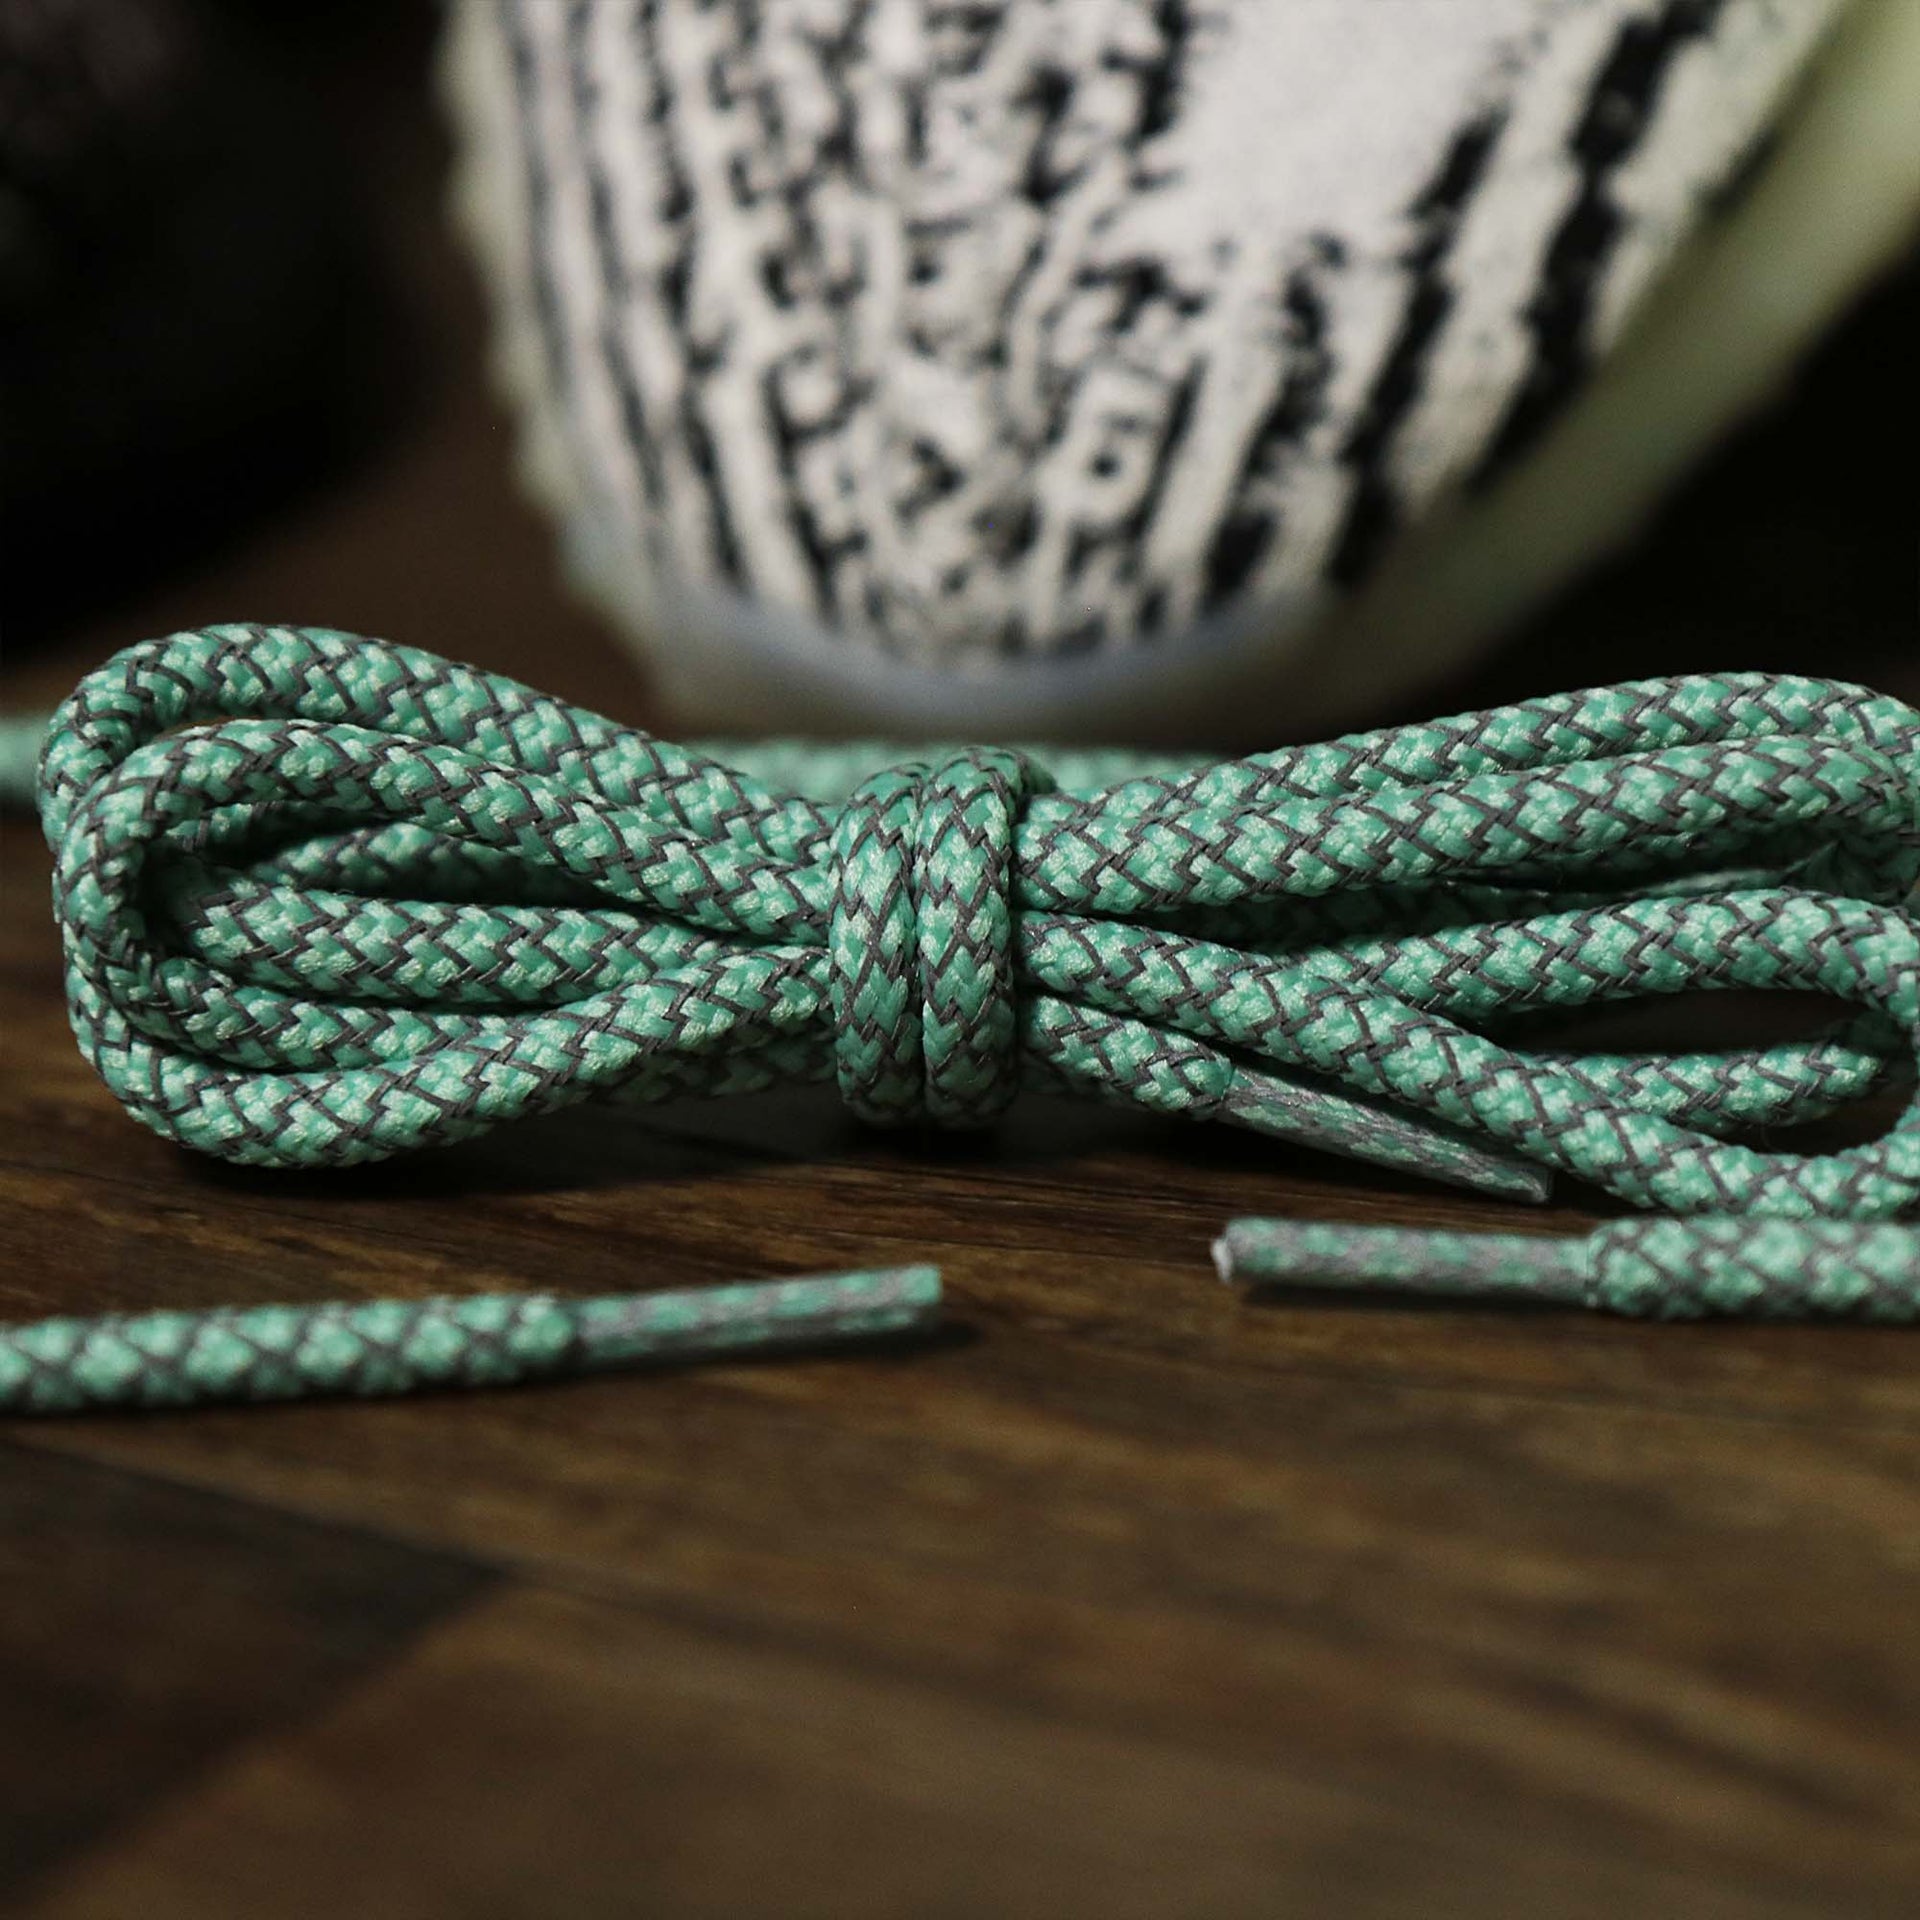 The 3M Reflective Turquoise Solid Shoelaces with Turquoise Aglets | 120cm Capswag unfolded